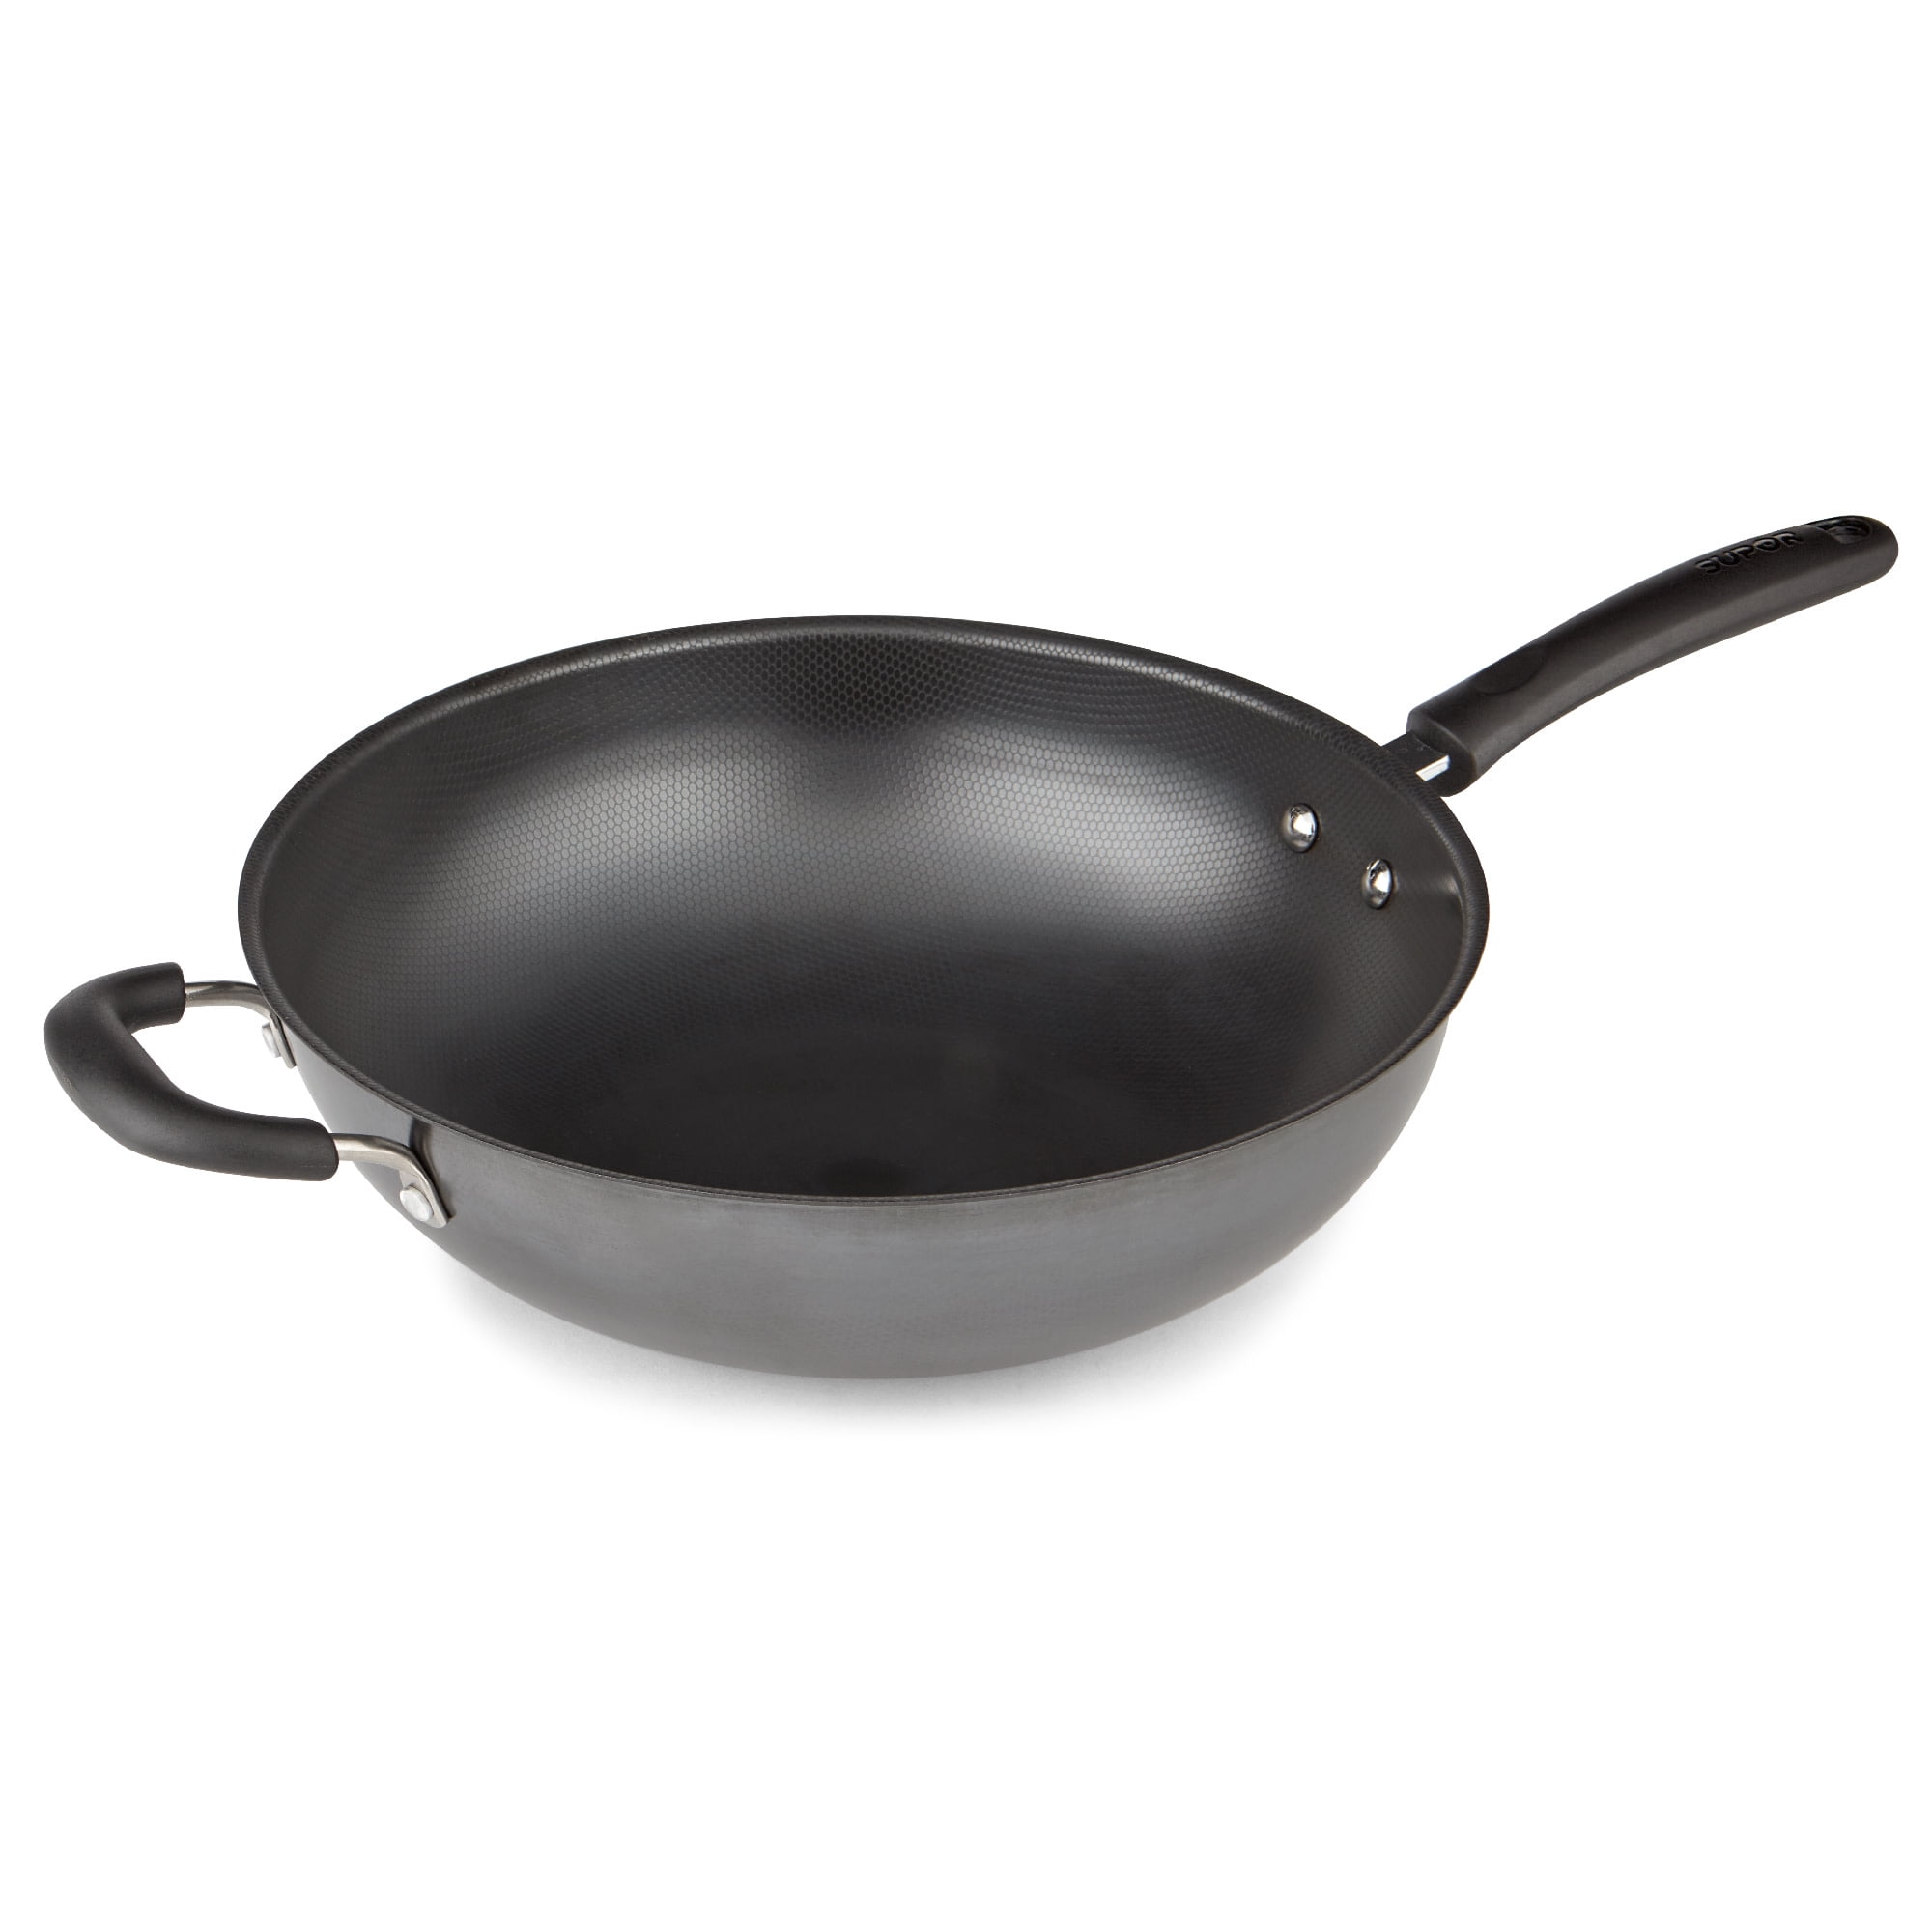 Mainstays 13.75" Non-Stick Wok Asian Cookware best cooking products best rated 